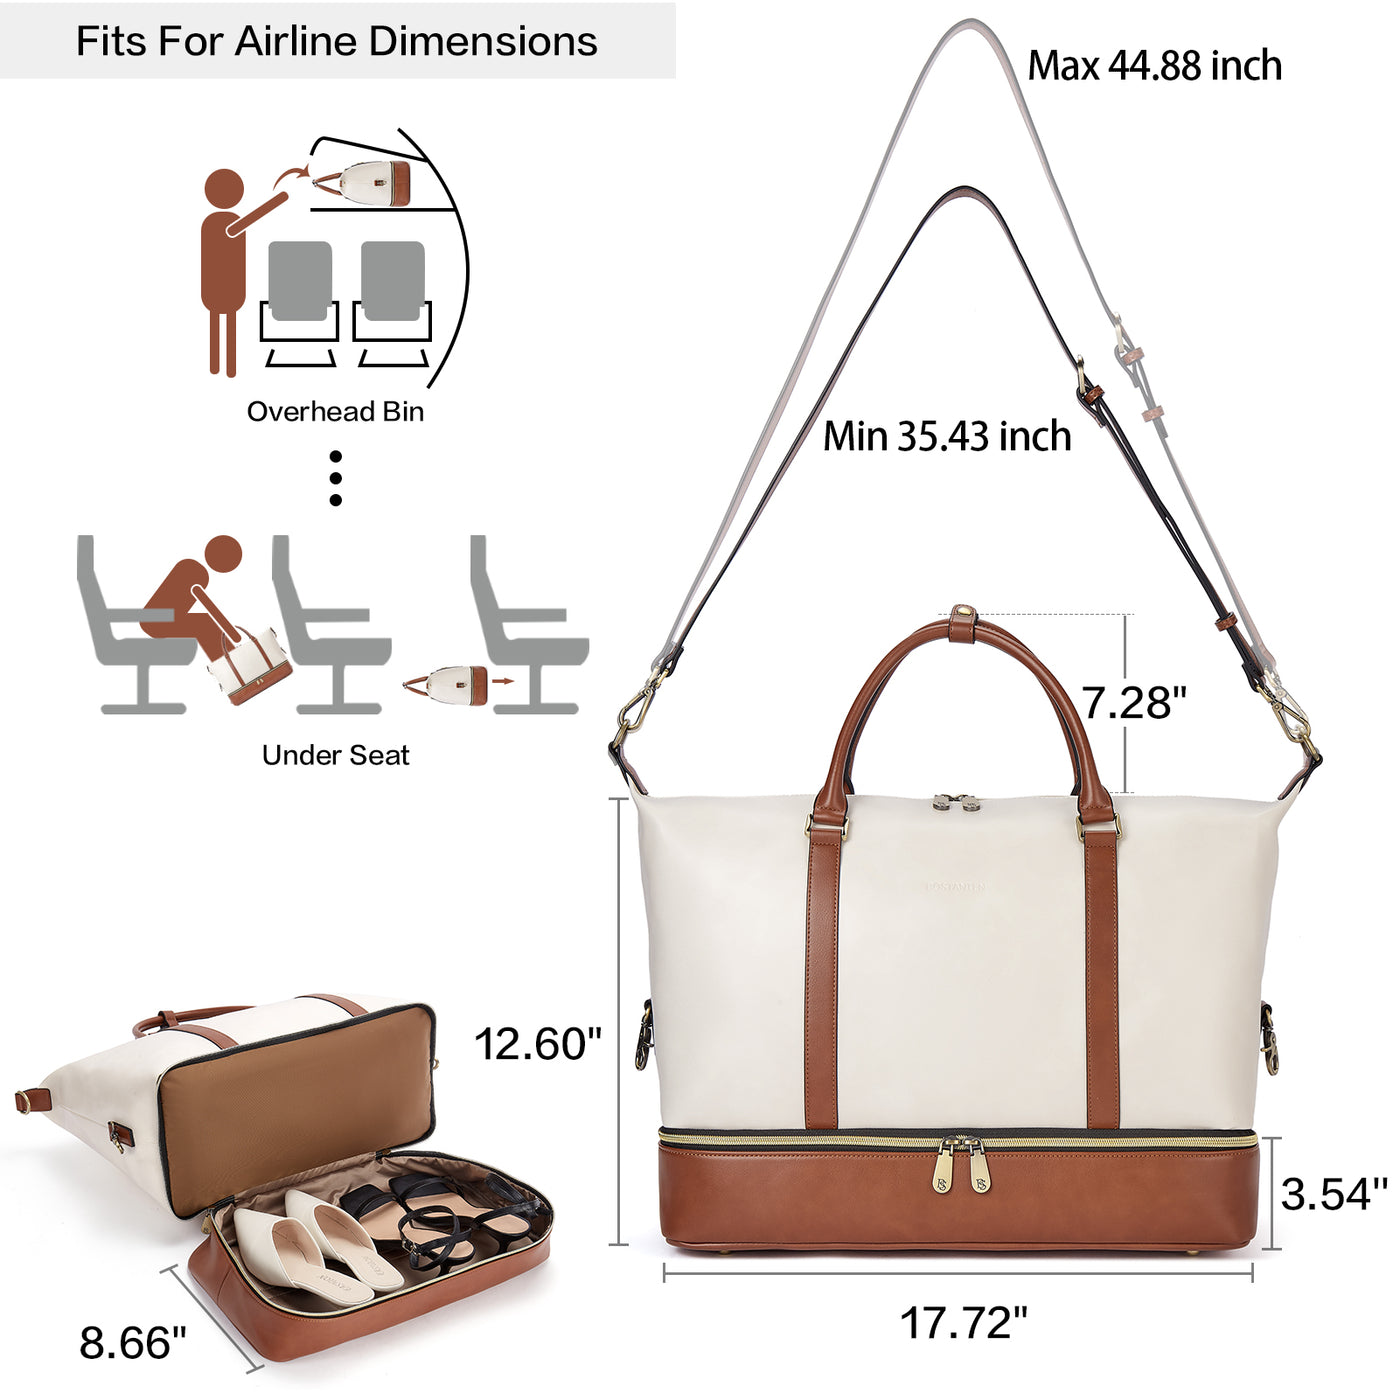 Zenobe Chic and Practical: Women's Leather Travel Duffle Bag for Every Trip